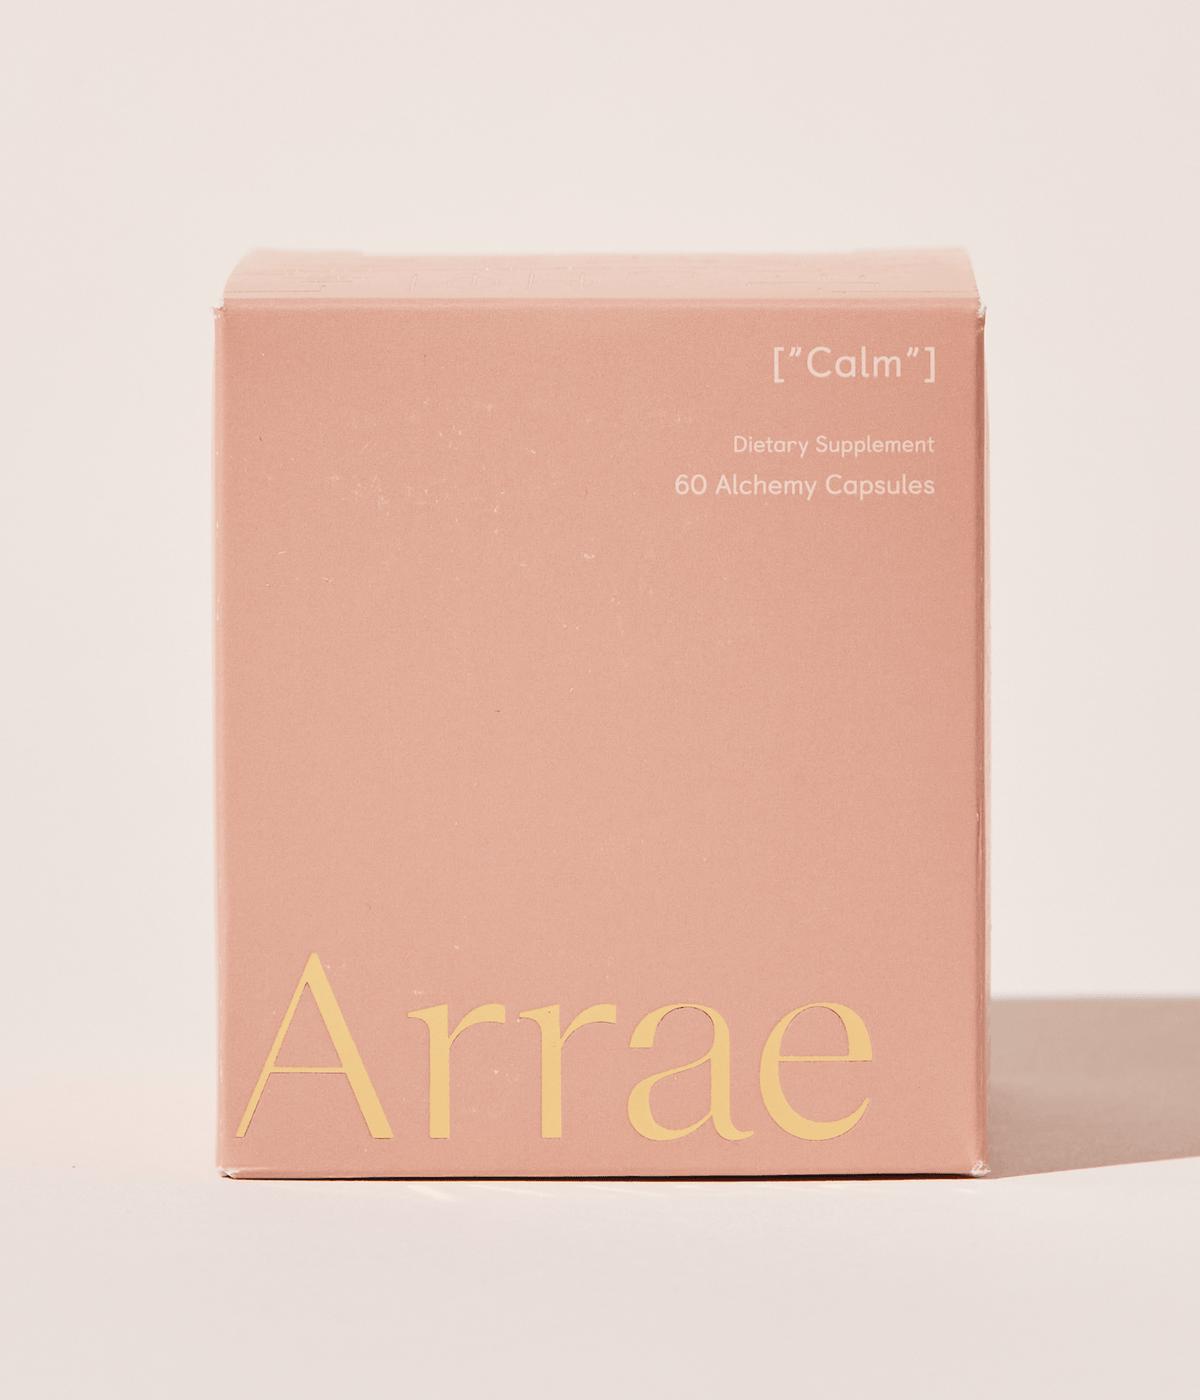 Arrae Calm Supplement box - A bottle of 60 capsules featuring a blend of natural ingredients, formulated to promote relaxation and reduce stress and anxiety